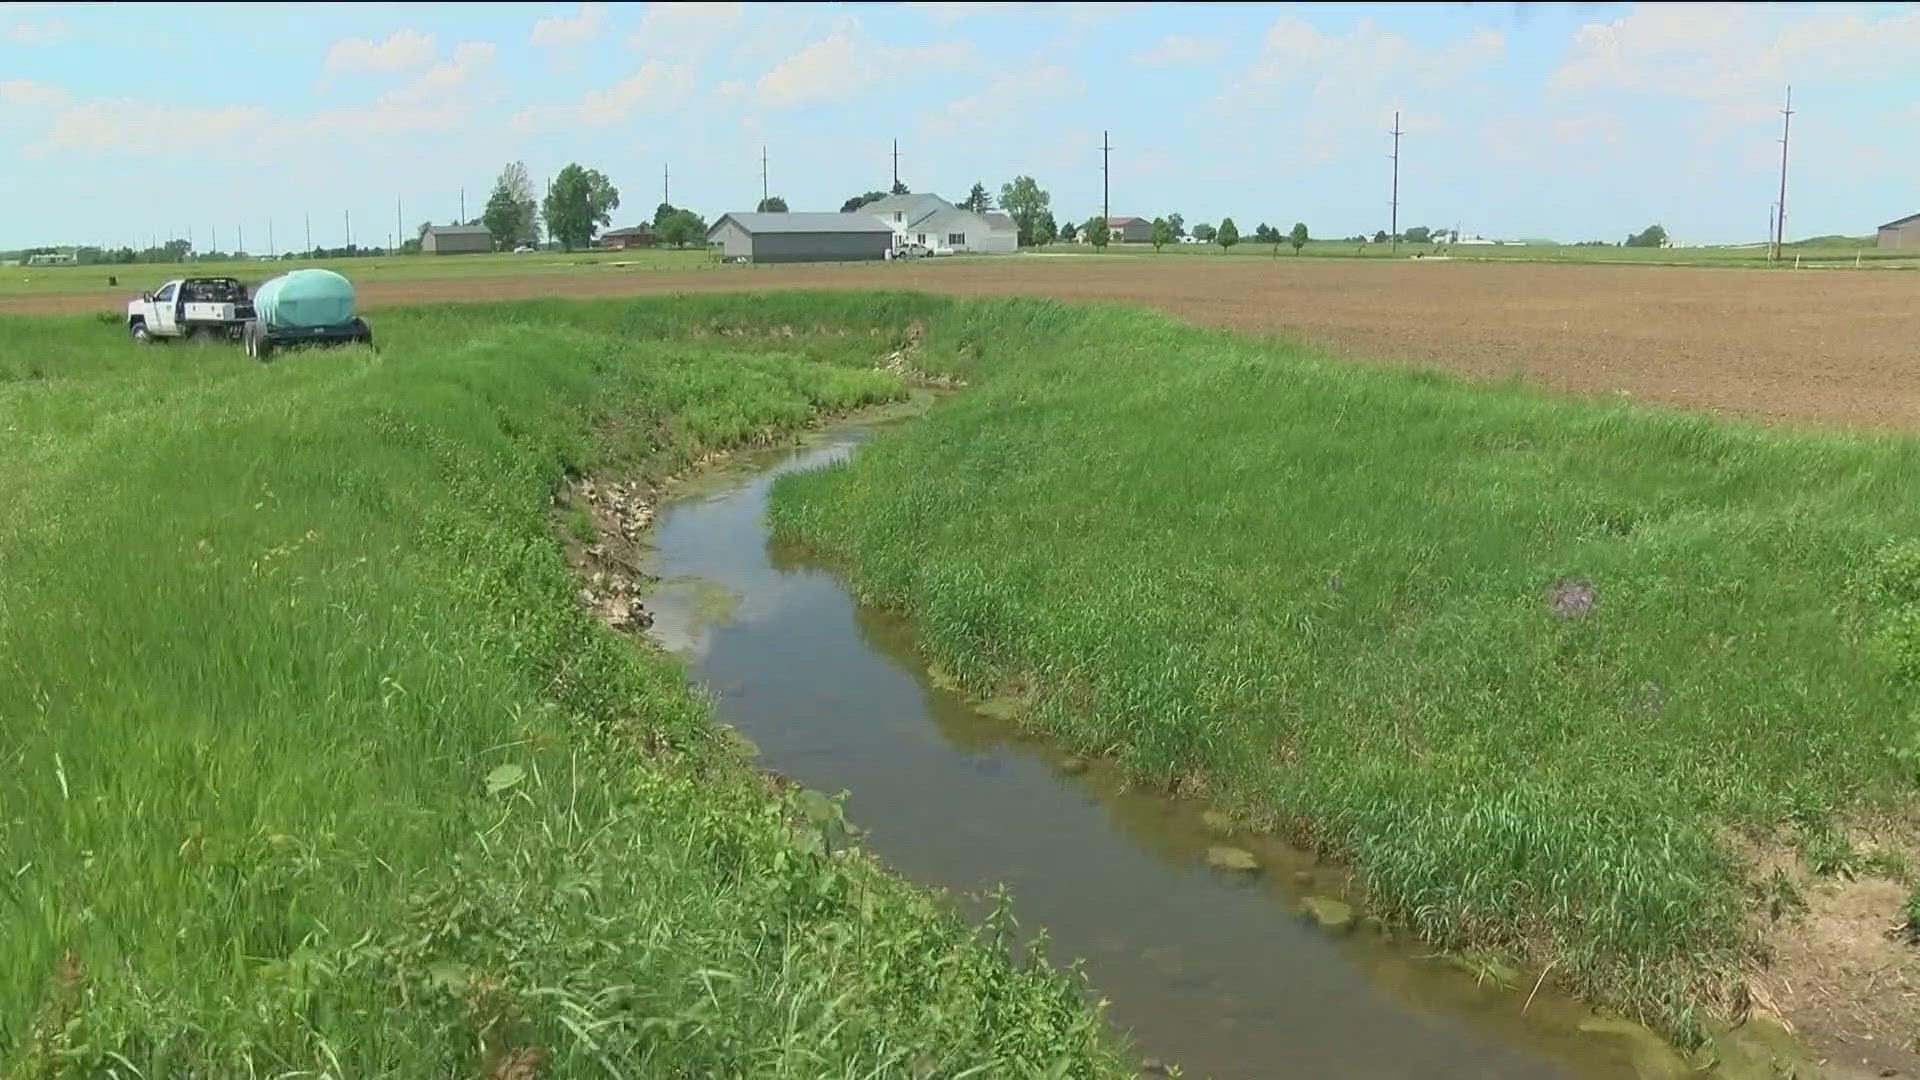 The bureau says the H2Ohio program has continued to make waterways cleaner, while advocates say the problems run deeper.